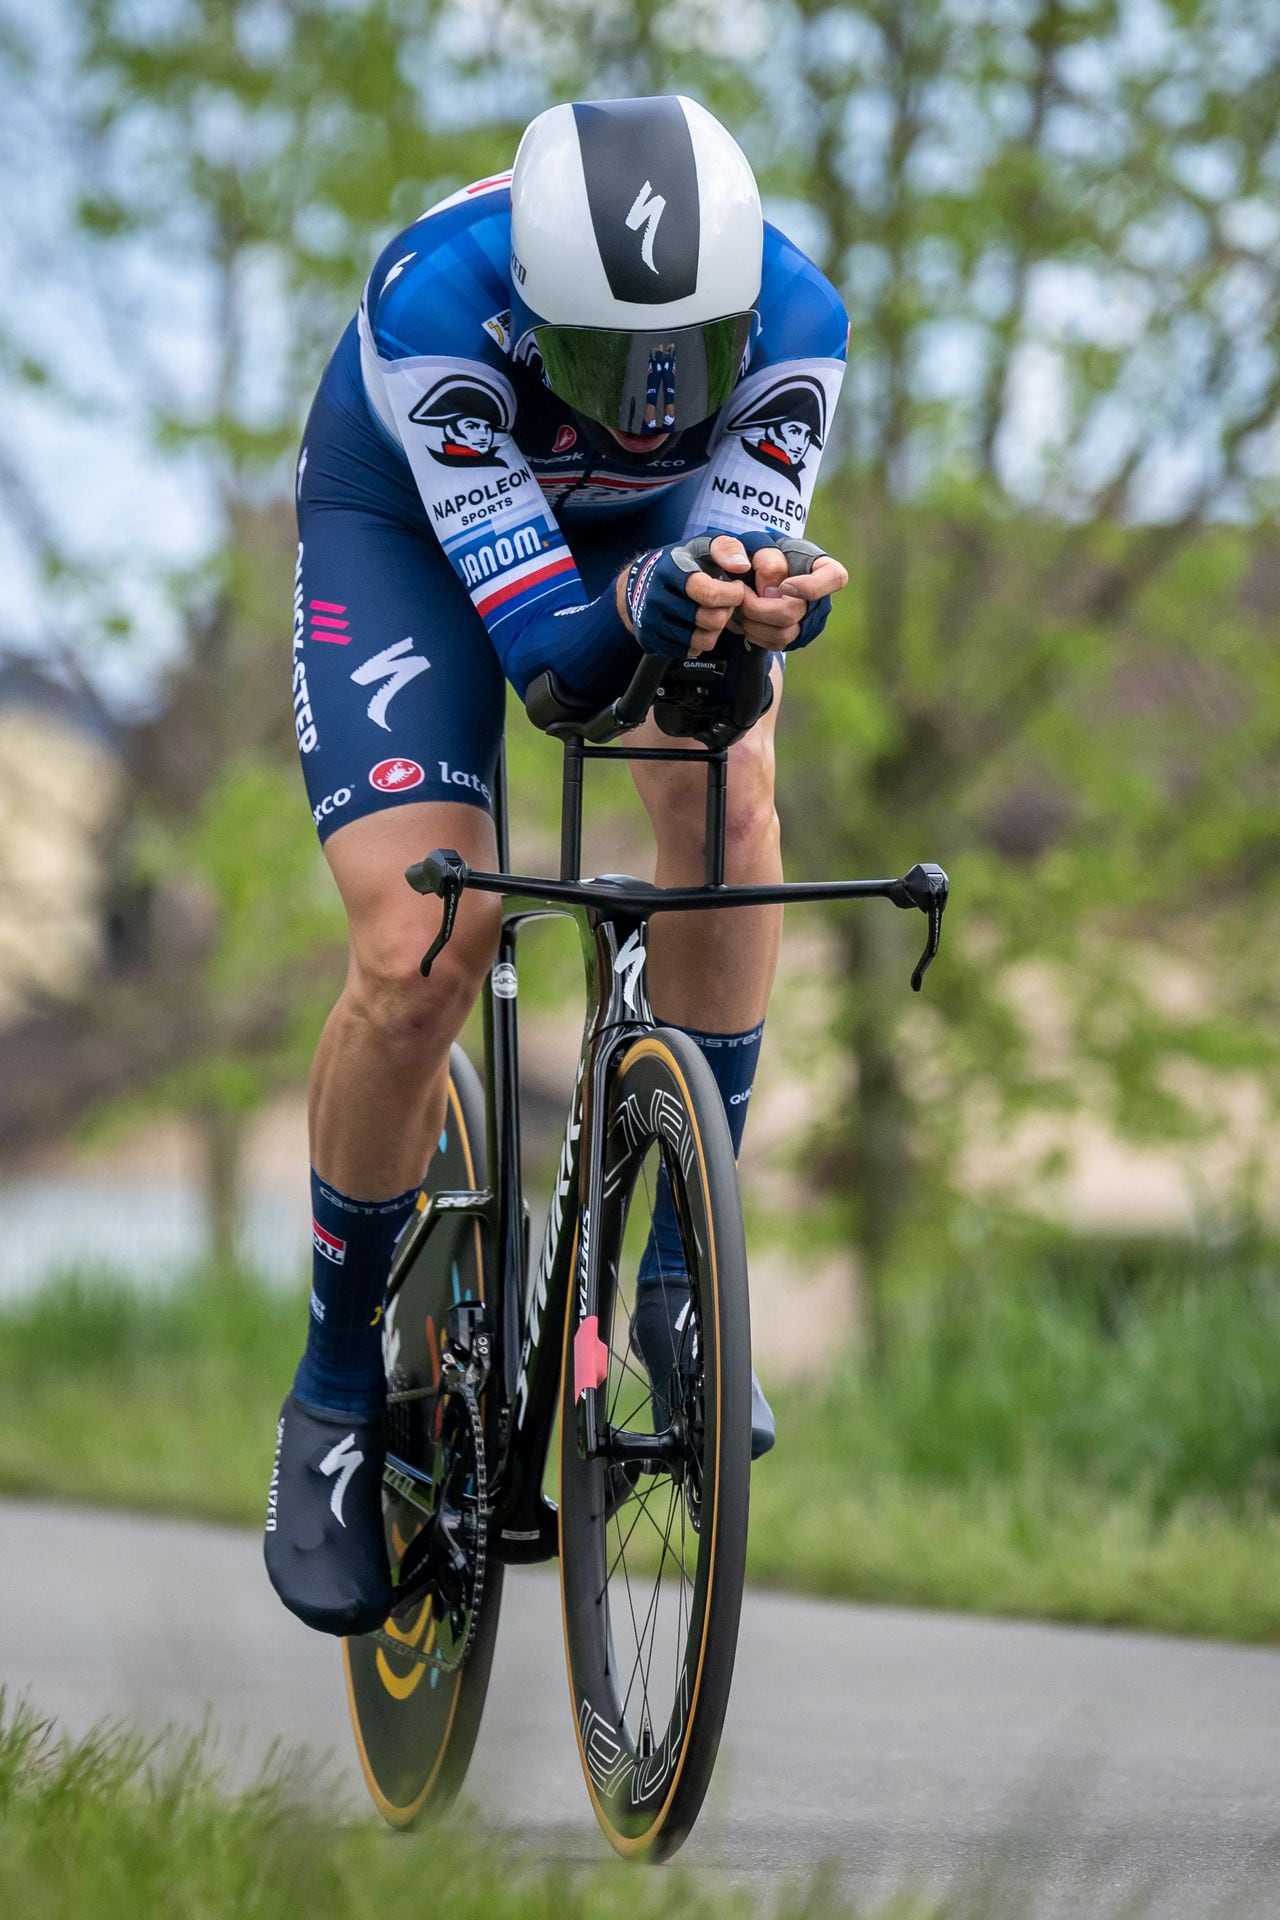 Czech Republic's Josef Cerny rides the prologue of the Tour of Romandie UCI World tour a time trial 6.8 km from Bouveret to Bouveret, on April 25, 2023. (Photo by Fabrice COFFRINI / AFP)